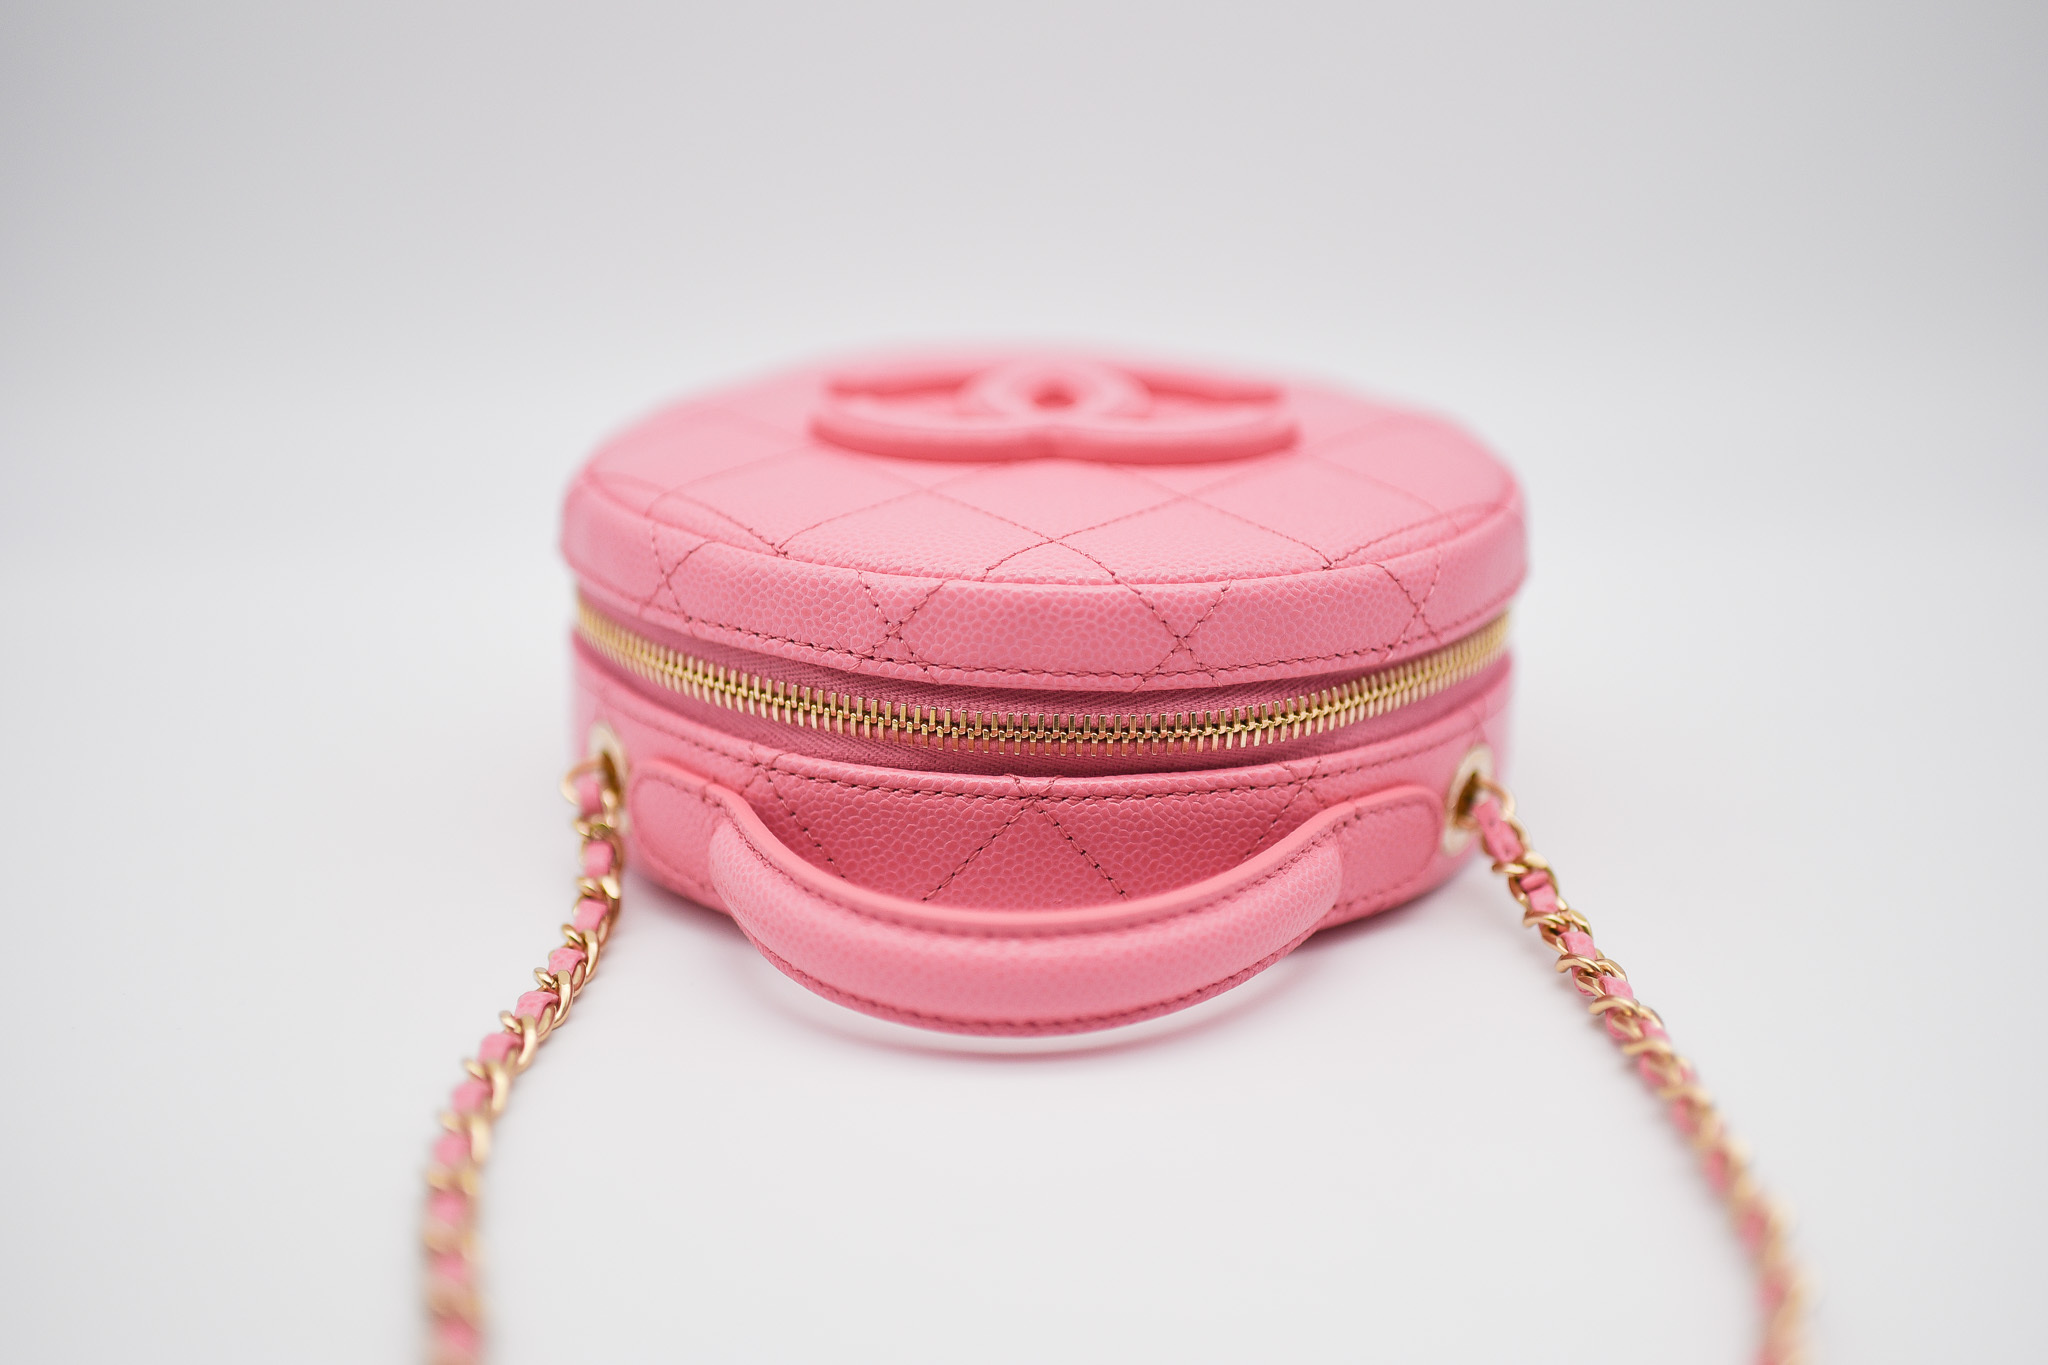 Chanel Round Top Handle Bag, Pink Caviar Leather, Gold Hardware, New in Box  MA001